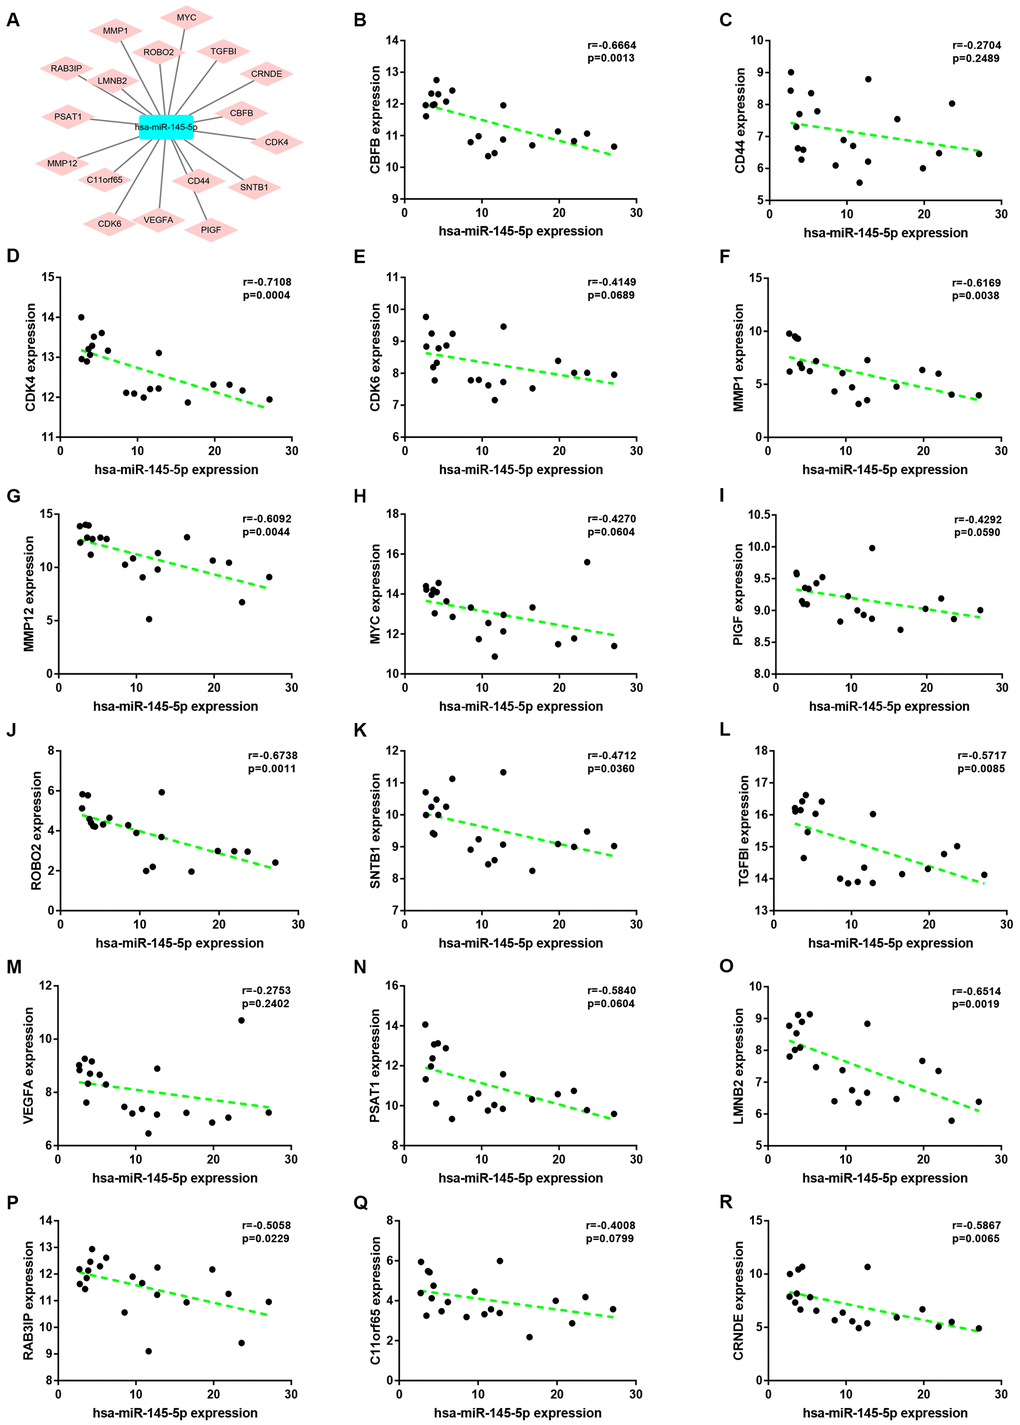 Correlation analysis for potential hsa-miR-145-5p-target gene pairs in colorectal cancer. (A) The visual hsa-miR-145-5p-target gene network. (B) The expression correlation of hsa-miR-145-5p with CBFB in colorectal cancer. (C) The expression correlation of hsa-miR-145-5p with CD44 in colorectal cancer. (D) The expression correlation of hsa-miR-145-5p with CDK4 in colorectal cancer. (E) The expression correlation of hsa-miR-145-5p with CDK6 in colorectal cancer. (F) The expression correlation of hsa-miR-145-5p with MMP1 in colorectal cancer. (G) The expression correlation of hsa-miR-145-5p with MMP12 in colorectal cancer. (H) The expression correlation of hsa-miR-145-5p with MYC in colorectal cancer. (I) The expression correlation of hsa-miR-145-5p with PIGF in colorectal cancer. (J) The expression correlation of hsa-miR-145-5p with ROBO2 in colorectal cancer. (K) The expression correlation of hsa-miR-145-5p with SNTB1 in colorectal cancer. (L) The expression correlation of hsa-miR-145-5p with TGFBI in colorectal cancer. (M) The expression correlation of hsa-miR-145-5p with VEGFA in colorectal cancer. (N) The expression correlation of hsa-miR-145-5p with PSAT1 in colorectal cancer. (O) The expression correlation of hsa-miR-145-5p with LMNB2 in colorectal cancer. (P) The expression correlation of hsa-miR-145-5p with RAB3IP in colorectal cancer. (Q) The expression correlation of hsa-miR-145-5p with C11orf65 in colorectal cancer. (R) The expression correlation of hsa-miR-145-5p with CRNDE in colorectal cancer. P-value 